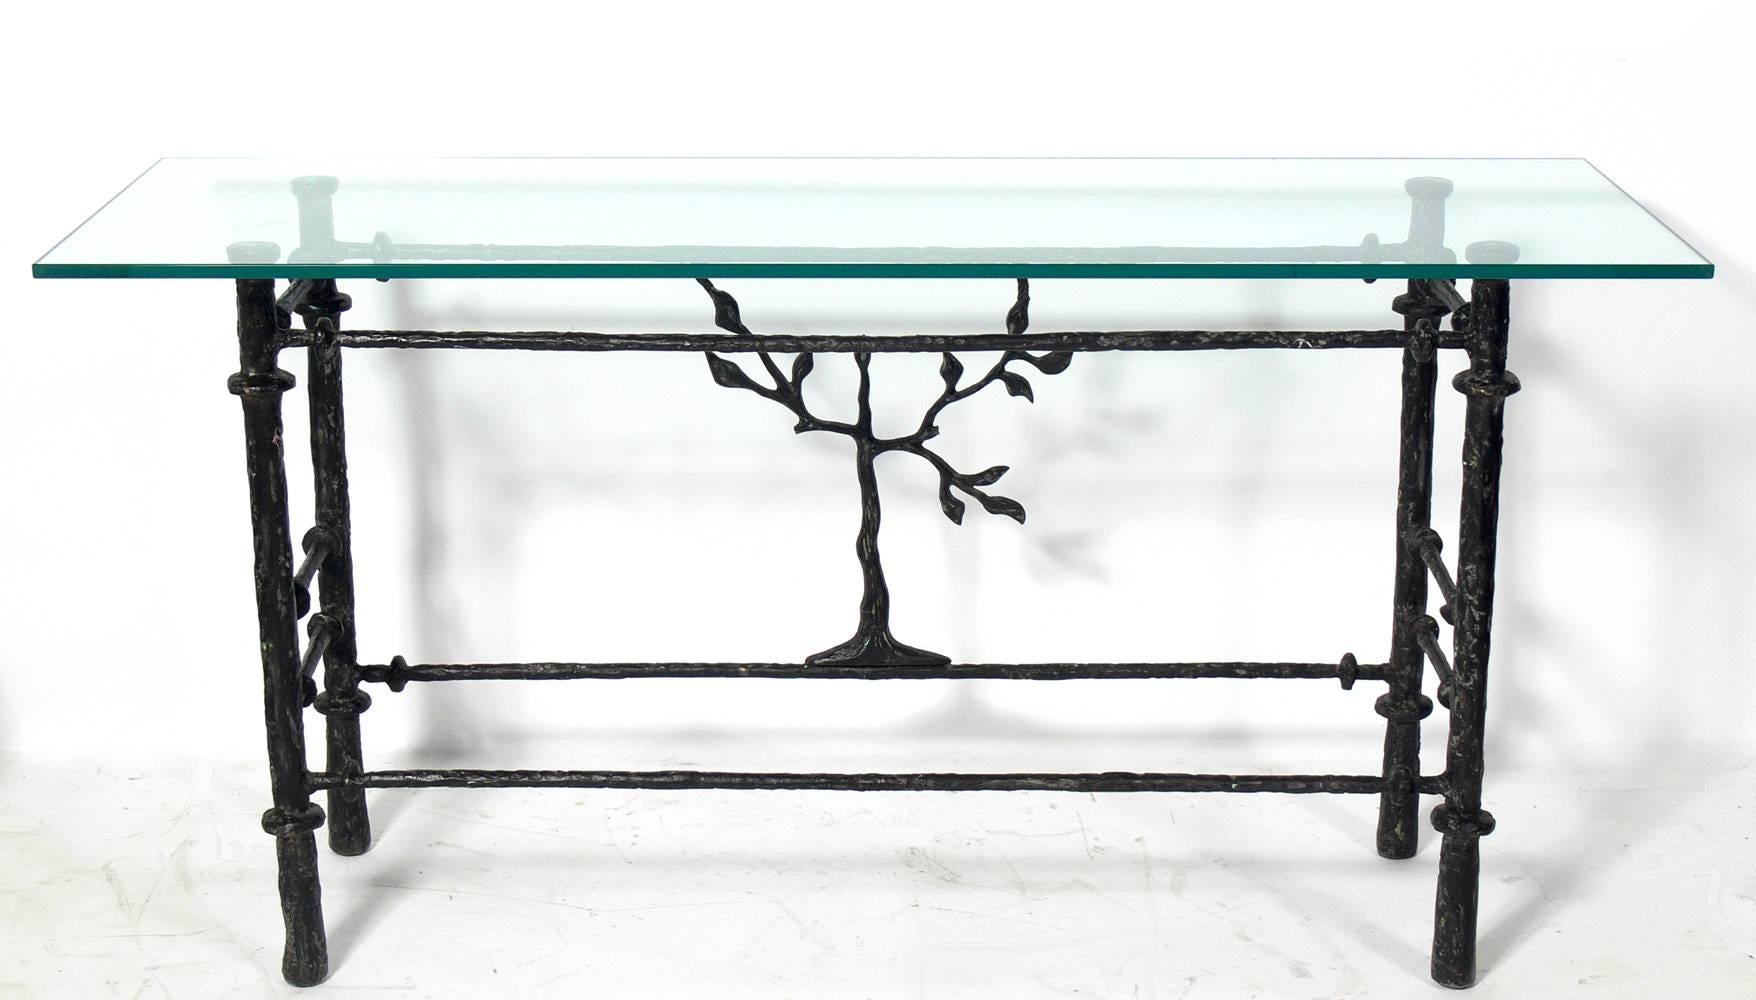 Sculptural console table in the manner of Diego Giacometti, circa 1980s.
This low slung table is a versatile size and can be used as a console table, bar, or sofa table. It is constructed of bronze patinated metal with a glass top.